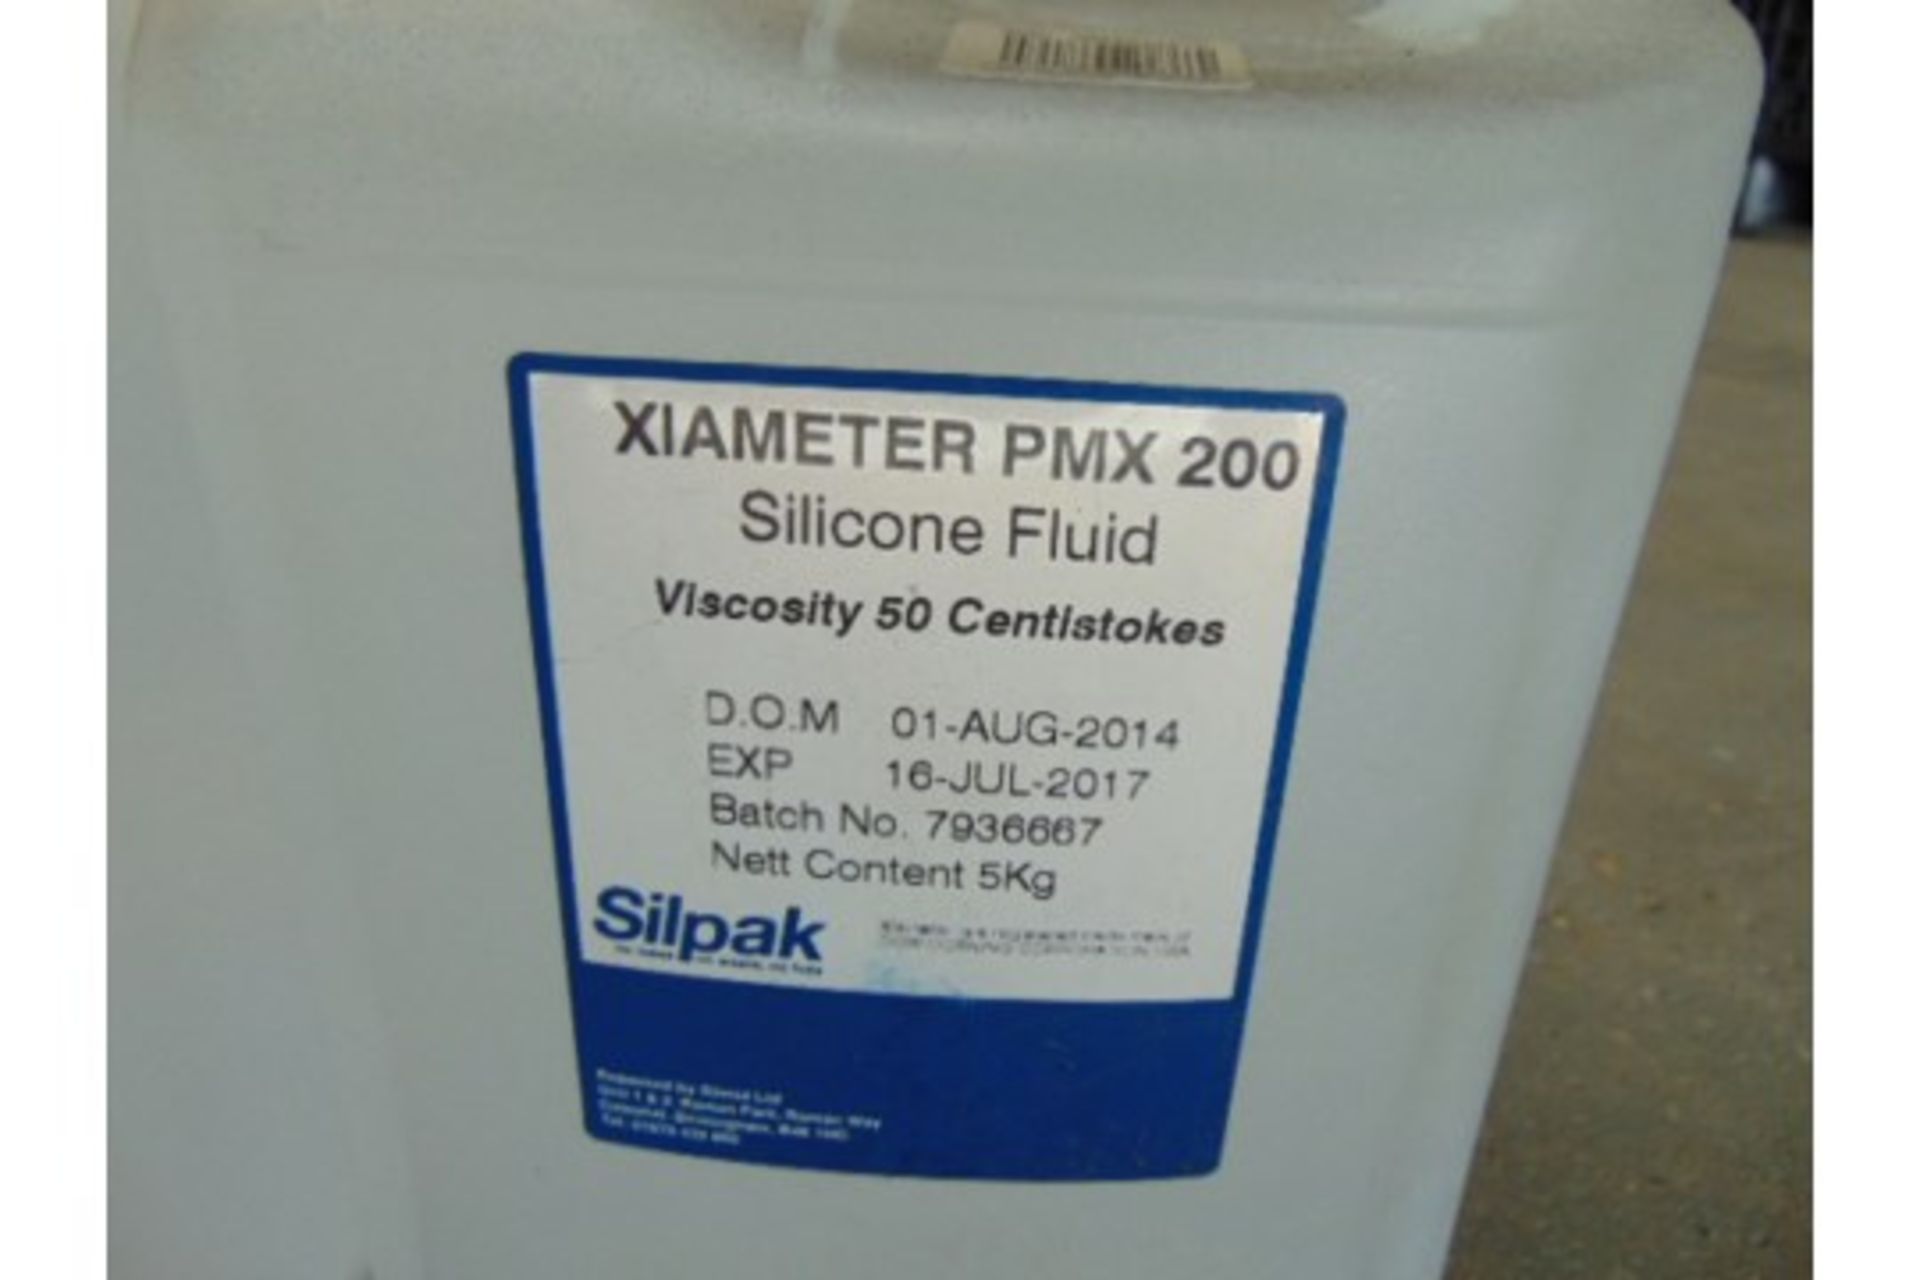 4 x Unissued 5Kg Bottles of Xiameter PMX 200 Commercial Grade Silicone Fluid - Image 3 of 3